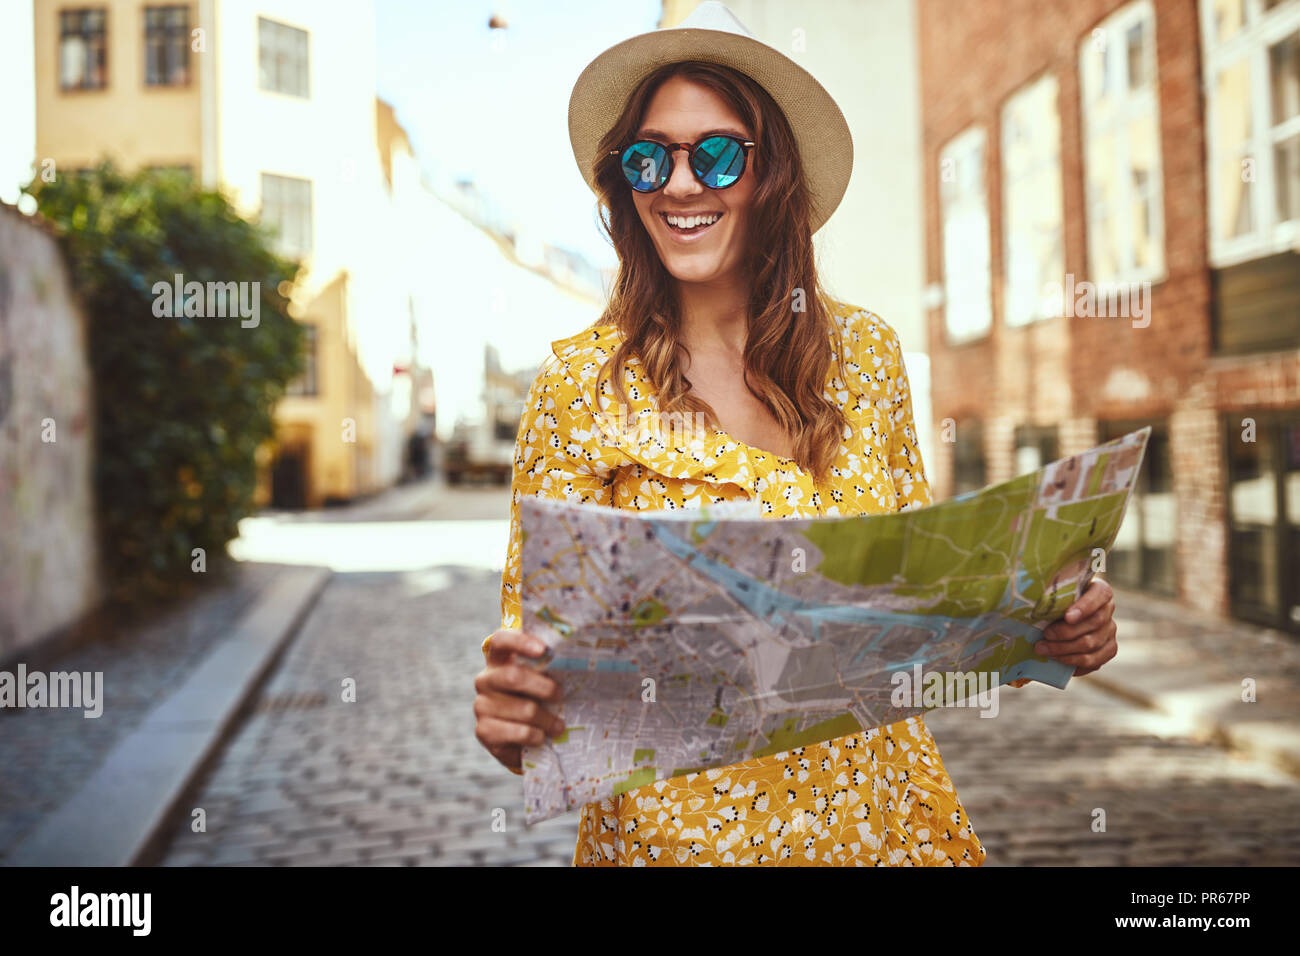 Smiling young brunette woman holding a map while exploring the cobblestone streets of a city wearing a hat and sunglasses Stock Photo